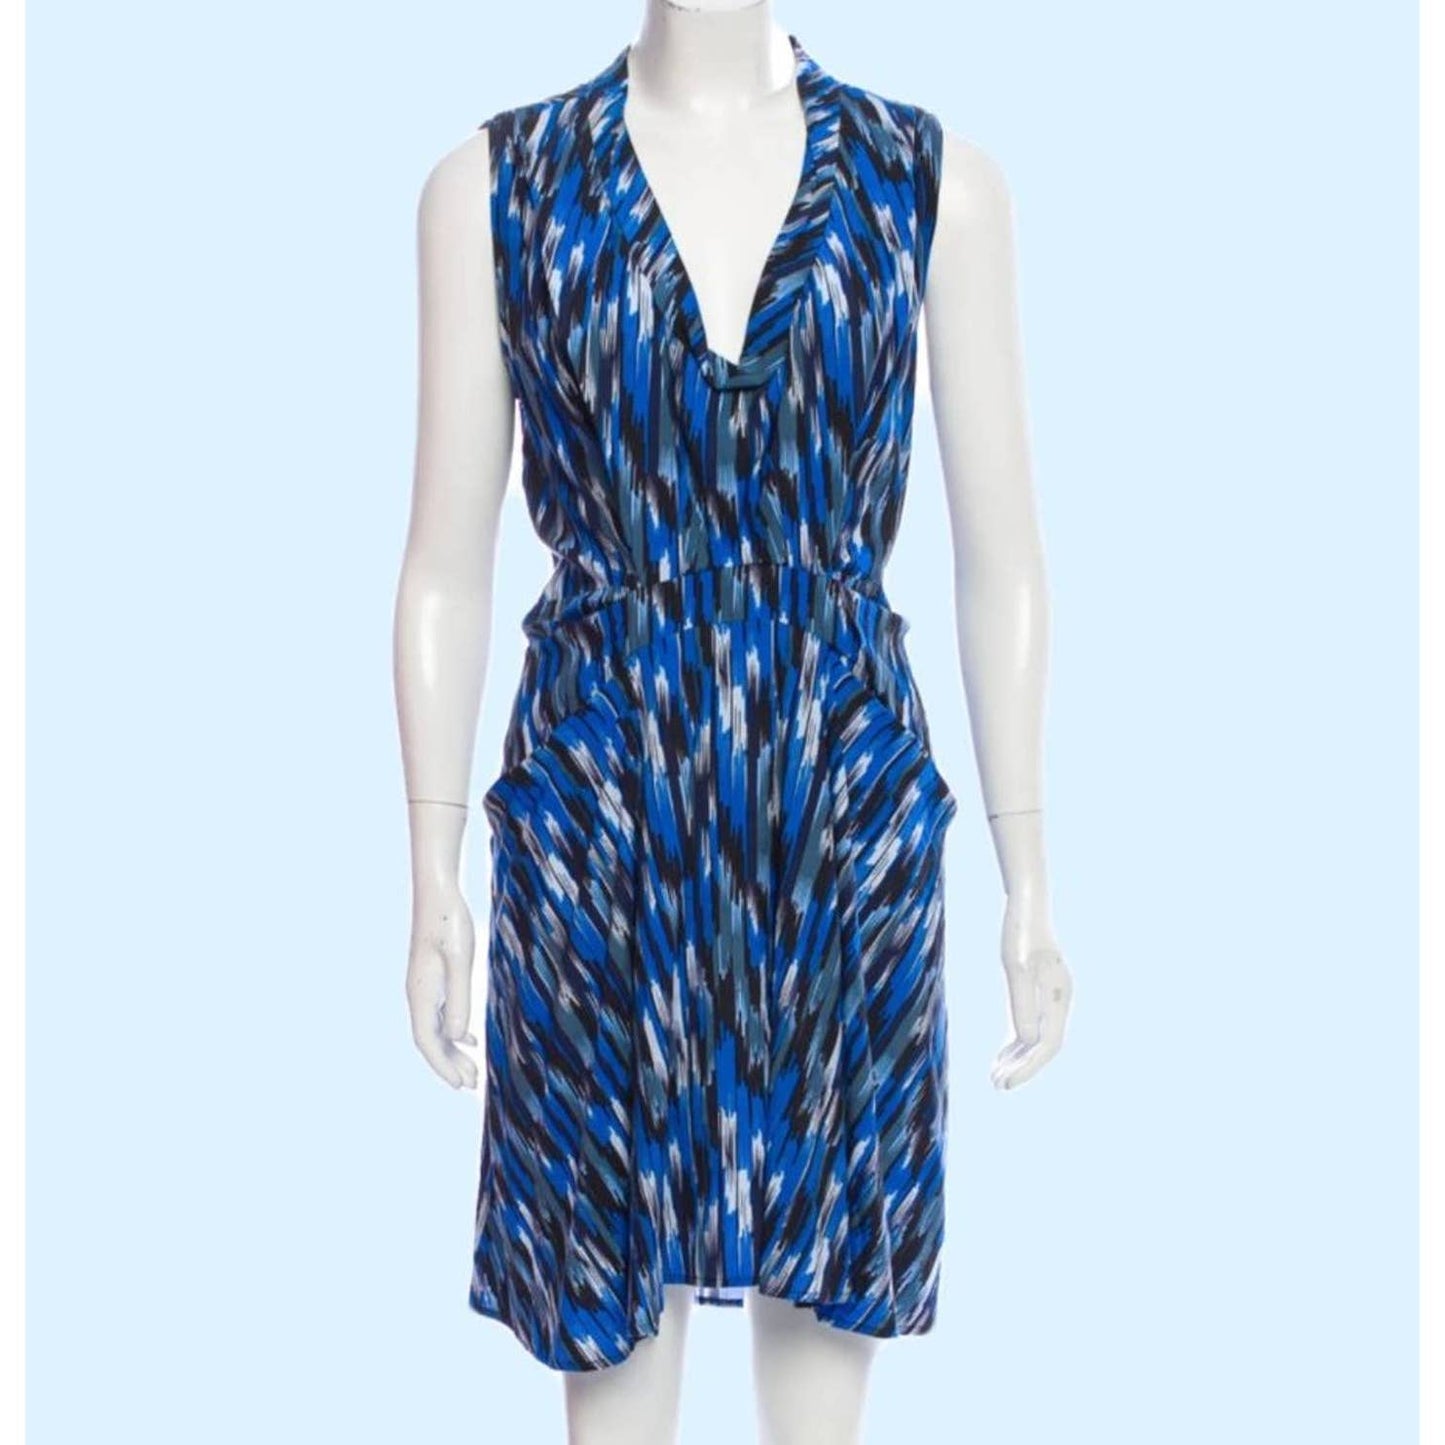 THAKOON Blue, Black and White Abstract Printed Sleeveless Dress